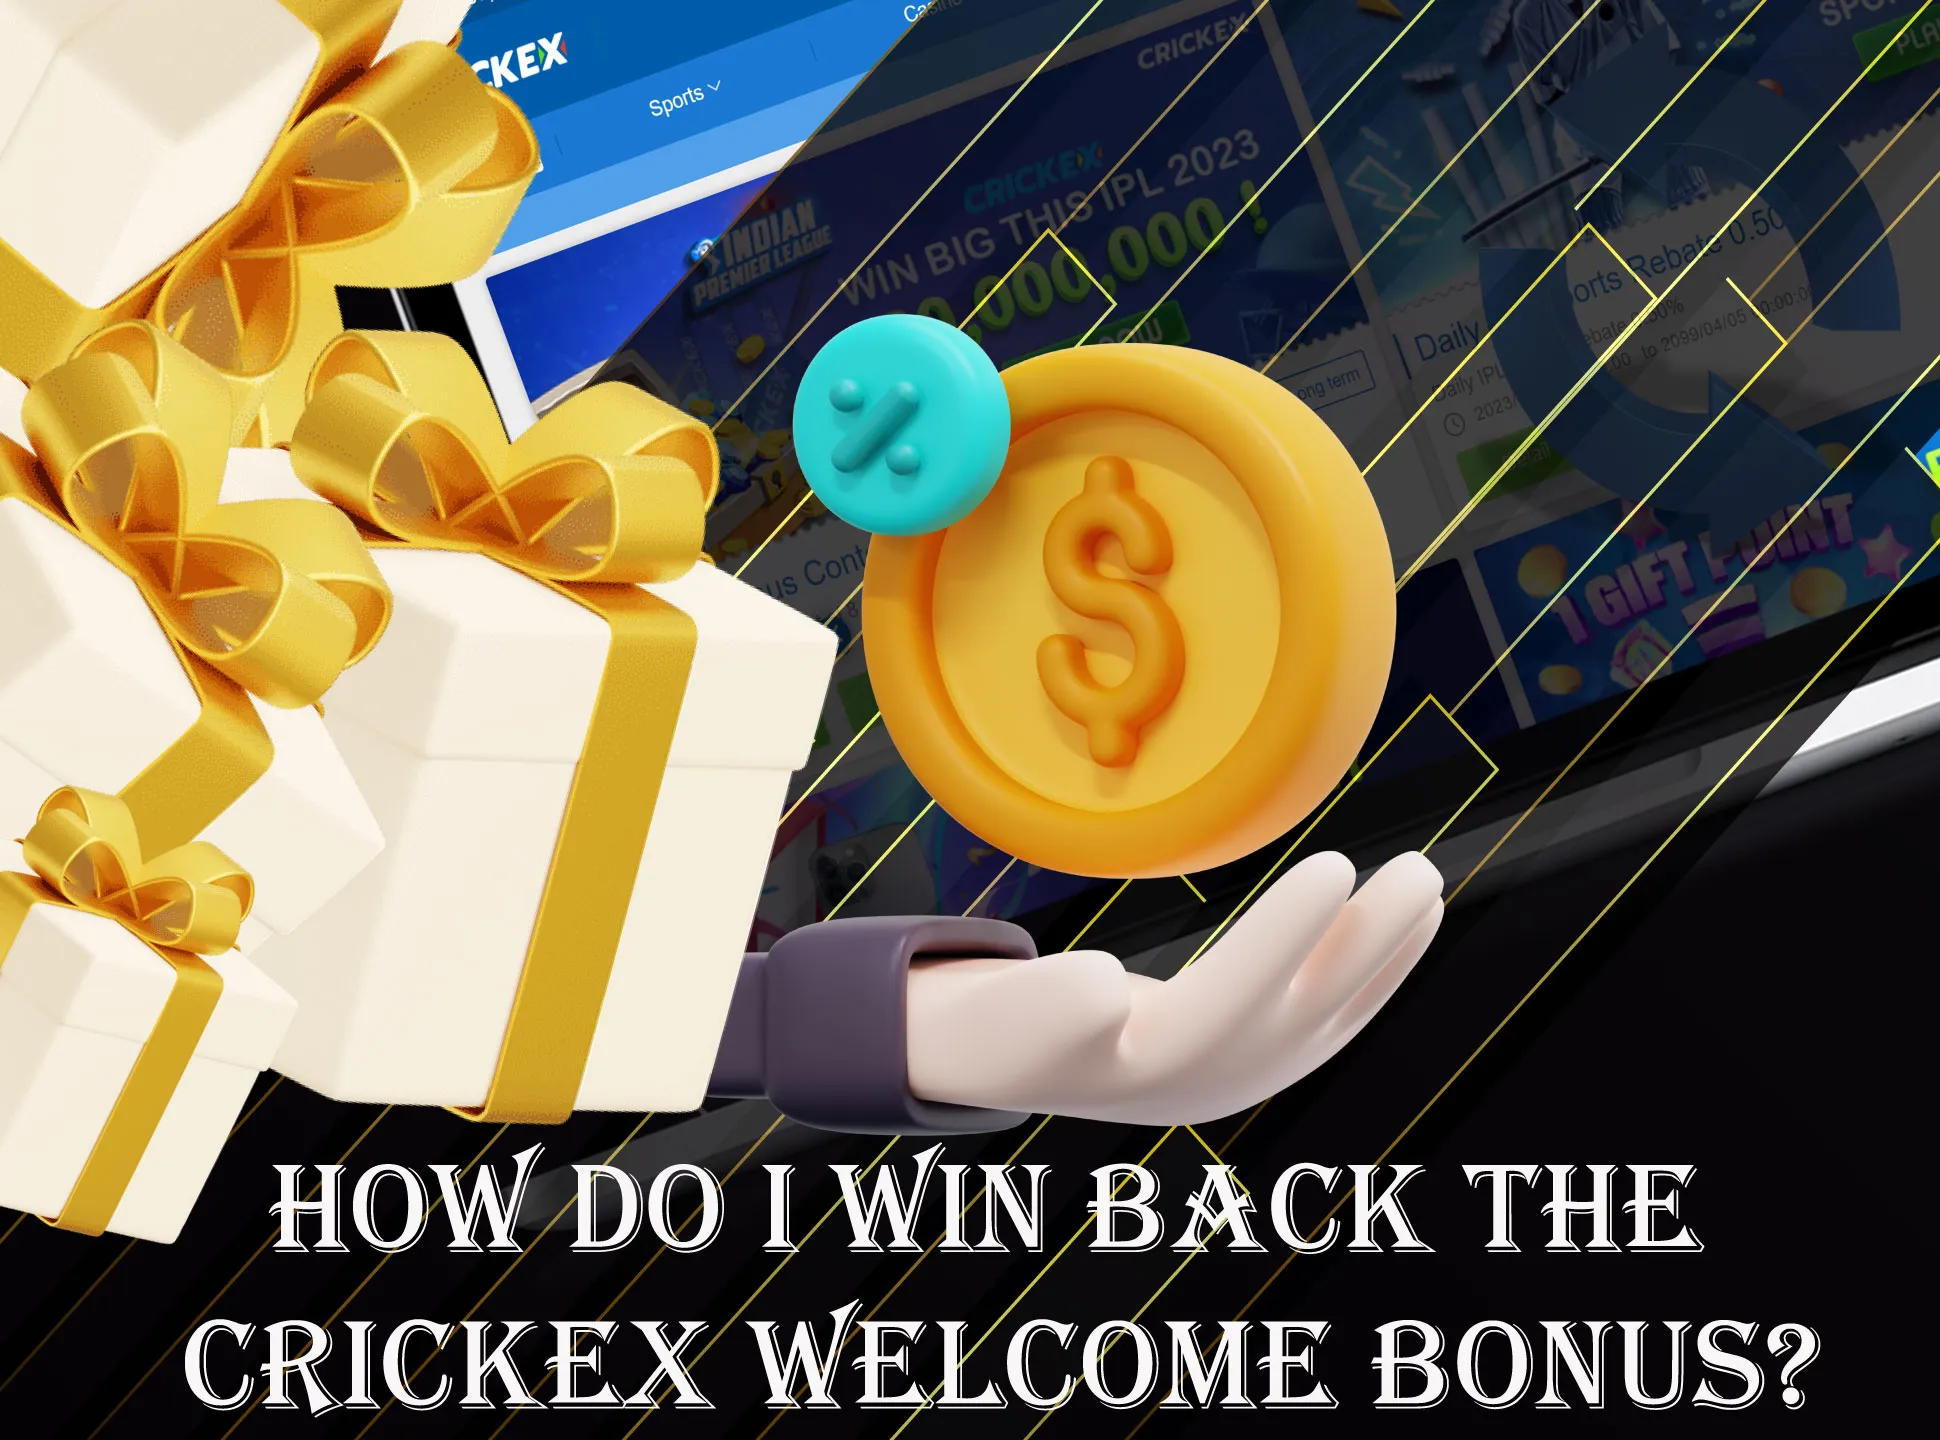 There are certain conditions that you should meet to win back the bonus money.